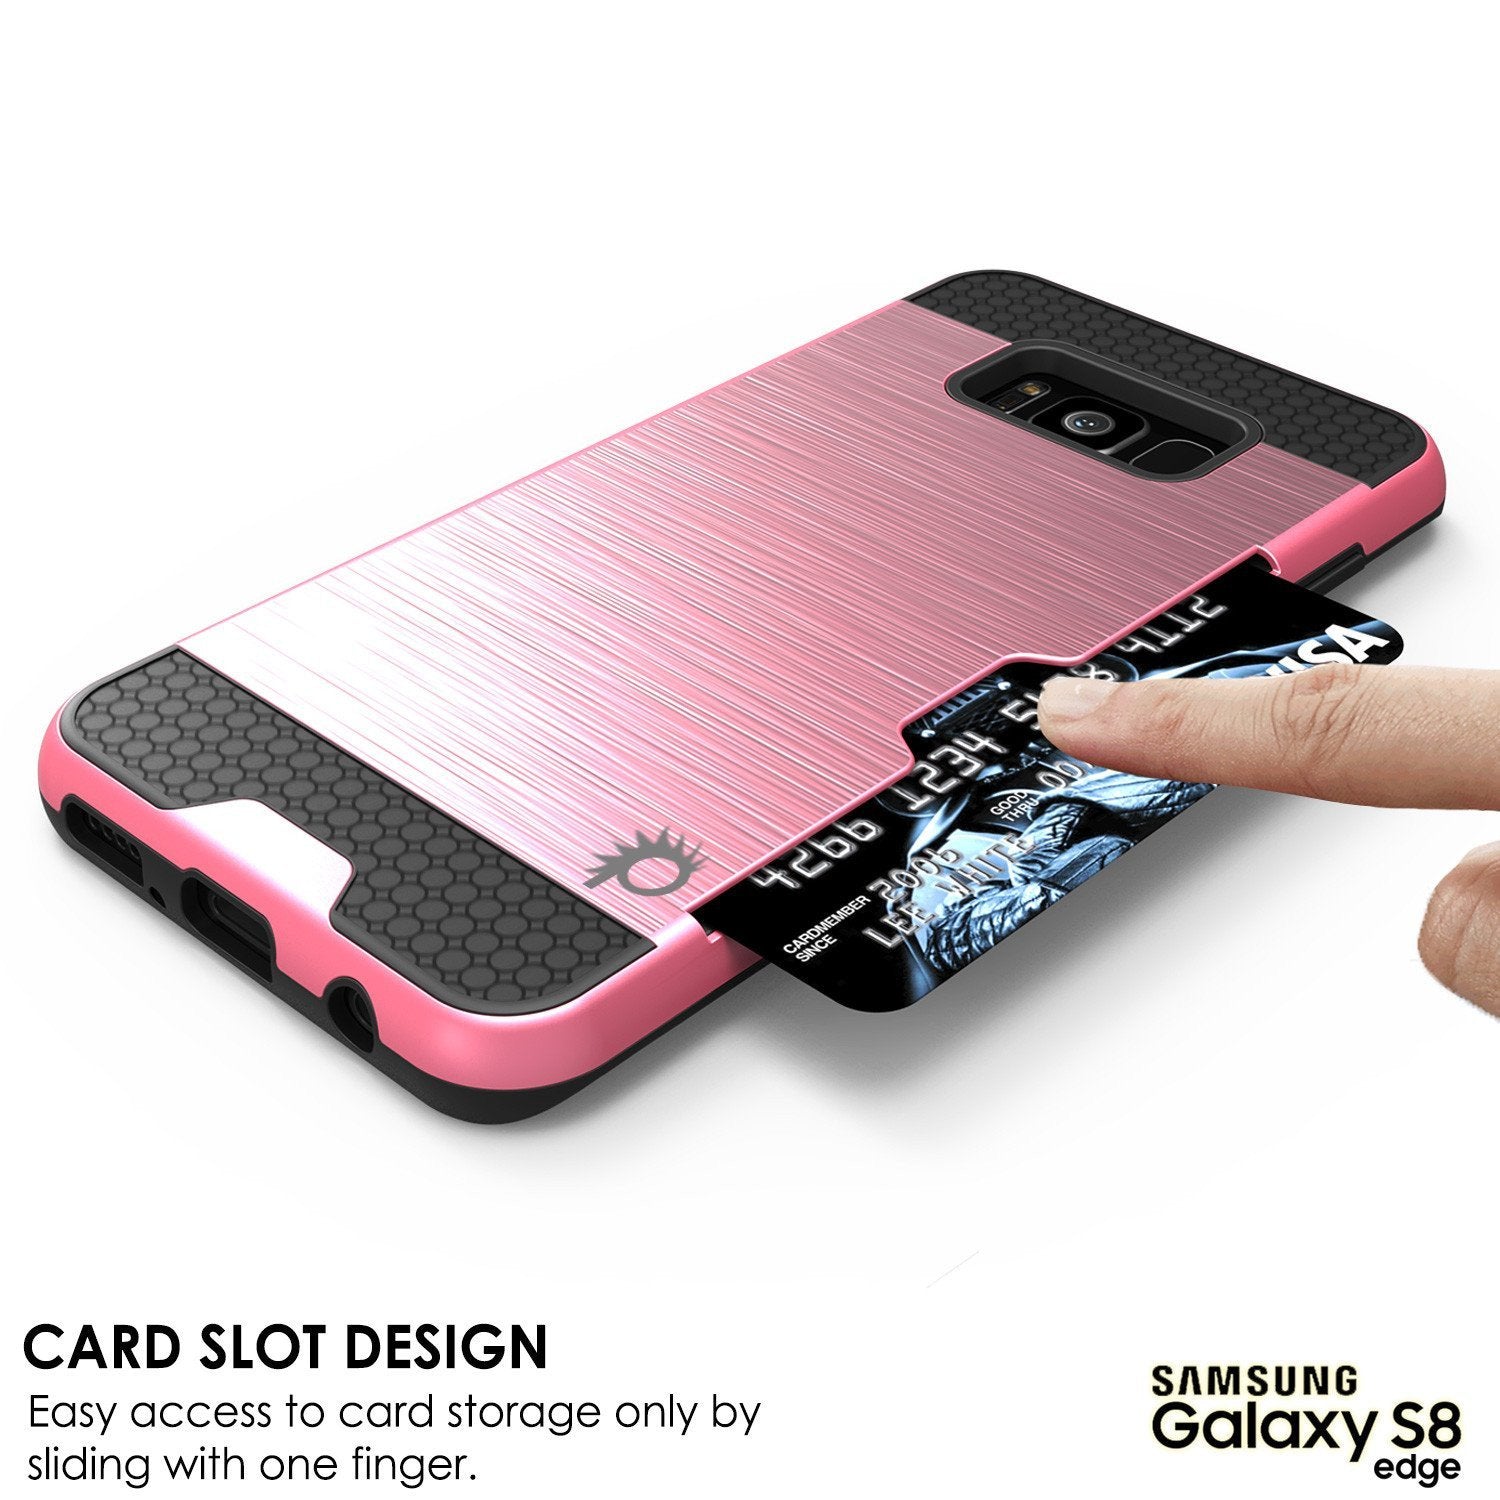 Galaxy S8 Case, PUNKcase [SLOT Series] [Slim Fit] Dual-Layer Armor Cover w/Integrated Anti-Shock System, Credit Card Slot & PUNKSHIELD Screen Protector for Samsung Galaxy S8 [Pink] - PunkCase NZ